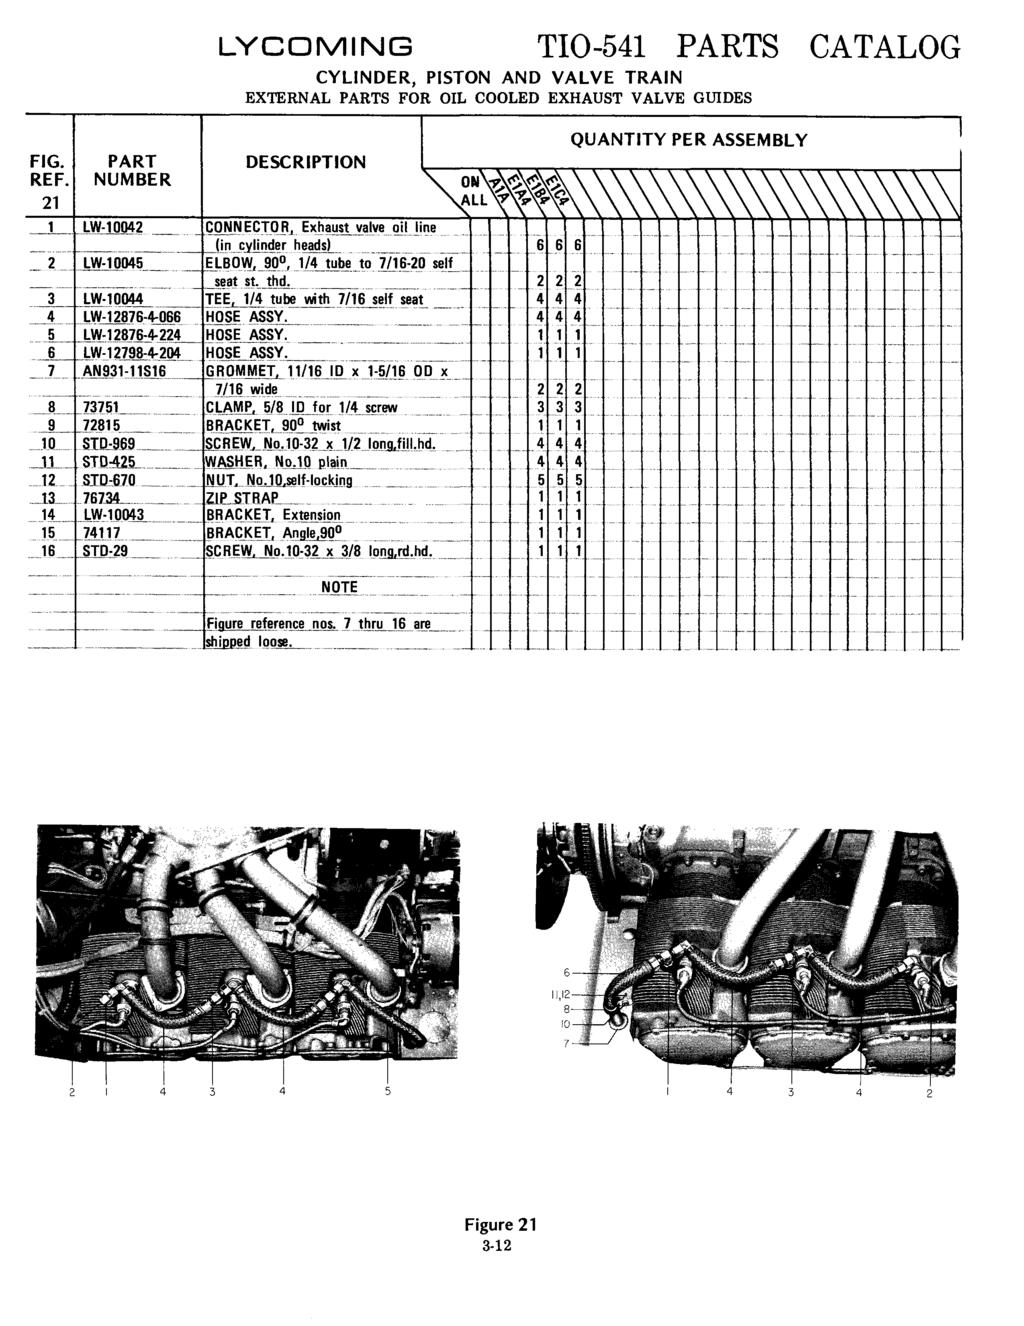 CYLINDER, PISTON AND VALVE TRAIN EXTERNAL PARTS FOR OIL COOLED EXHAUST VALVE GUIDES QUANTITY PER ASSEMBLY FIG. REF.